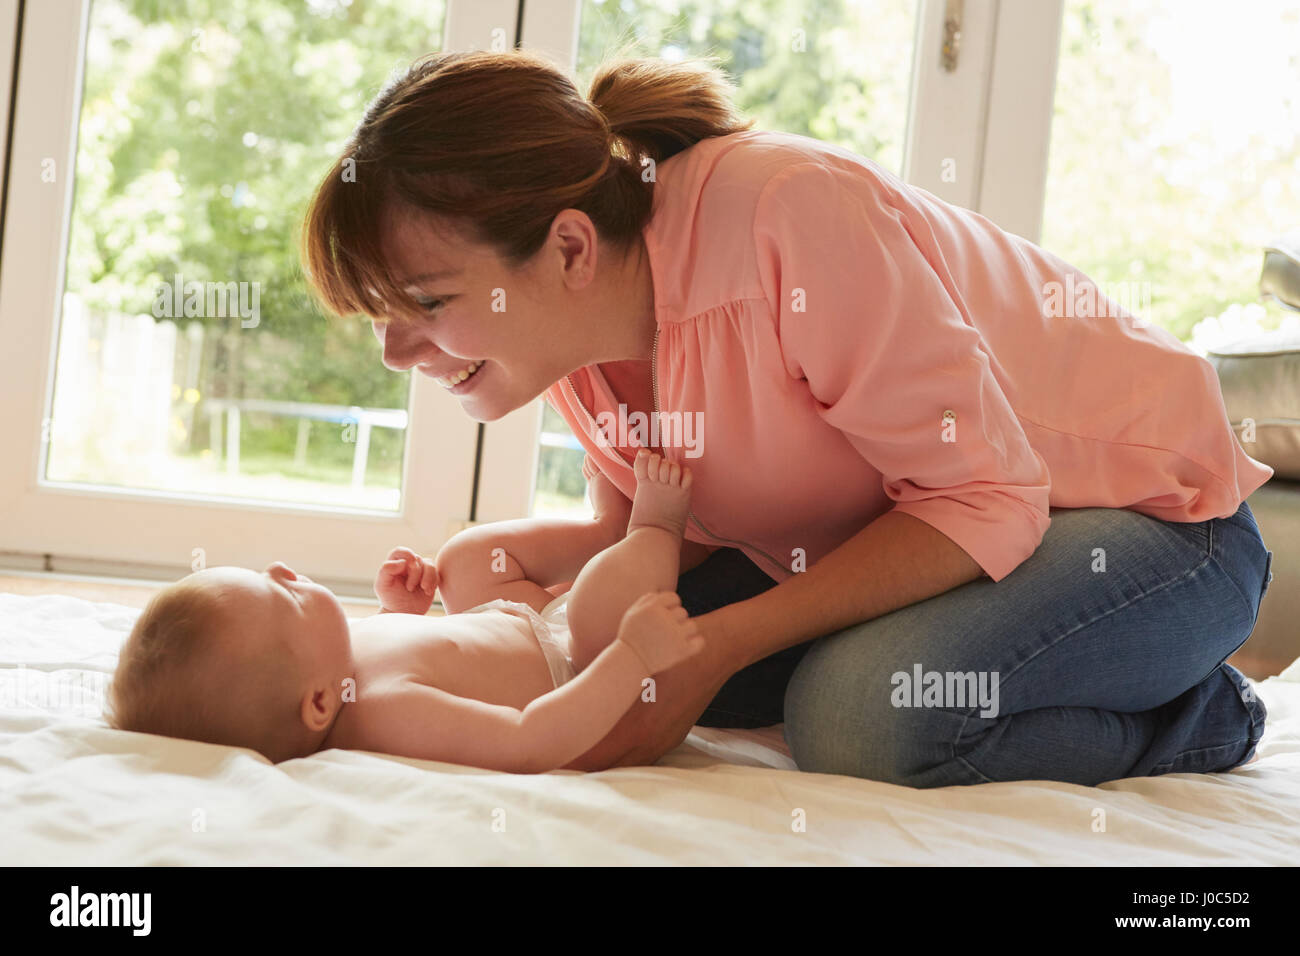 Mid adult woman kneeling on floor playing with baby son Stock Photo